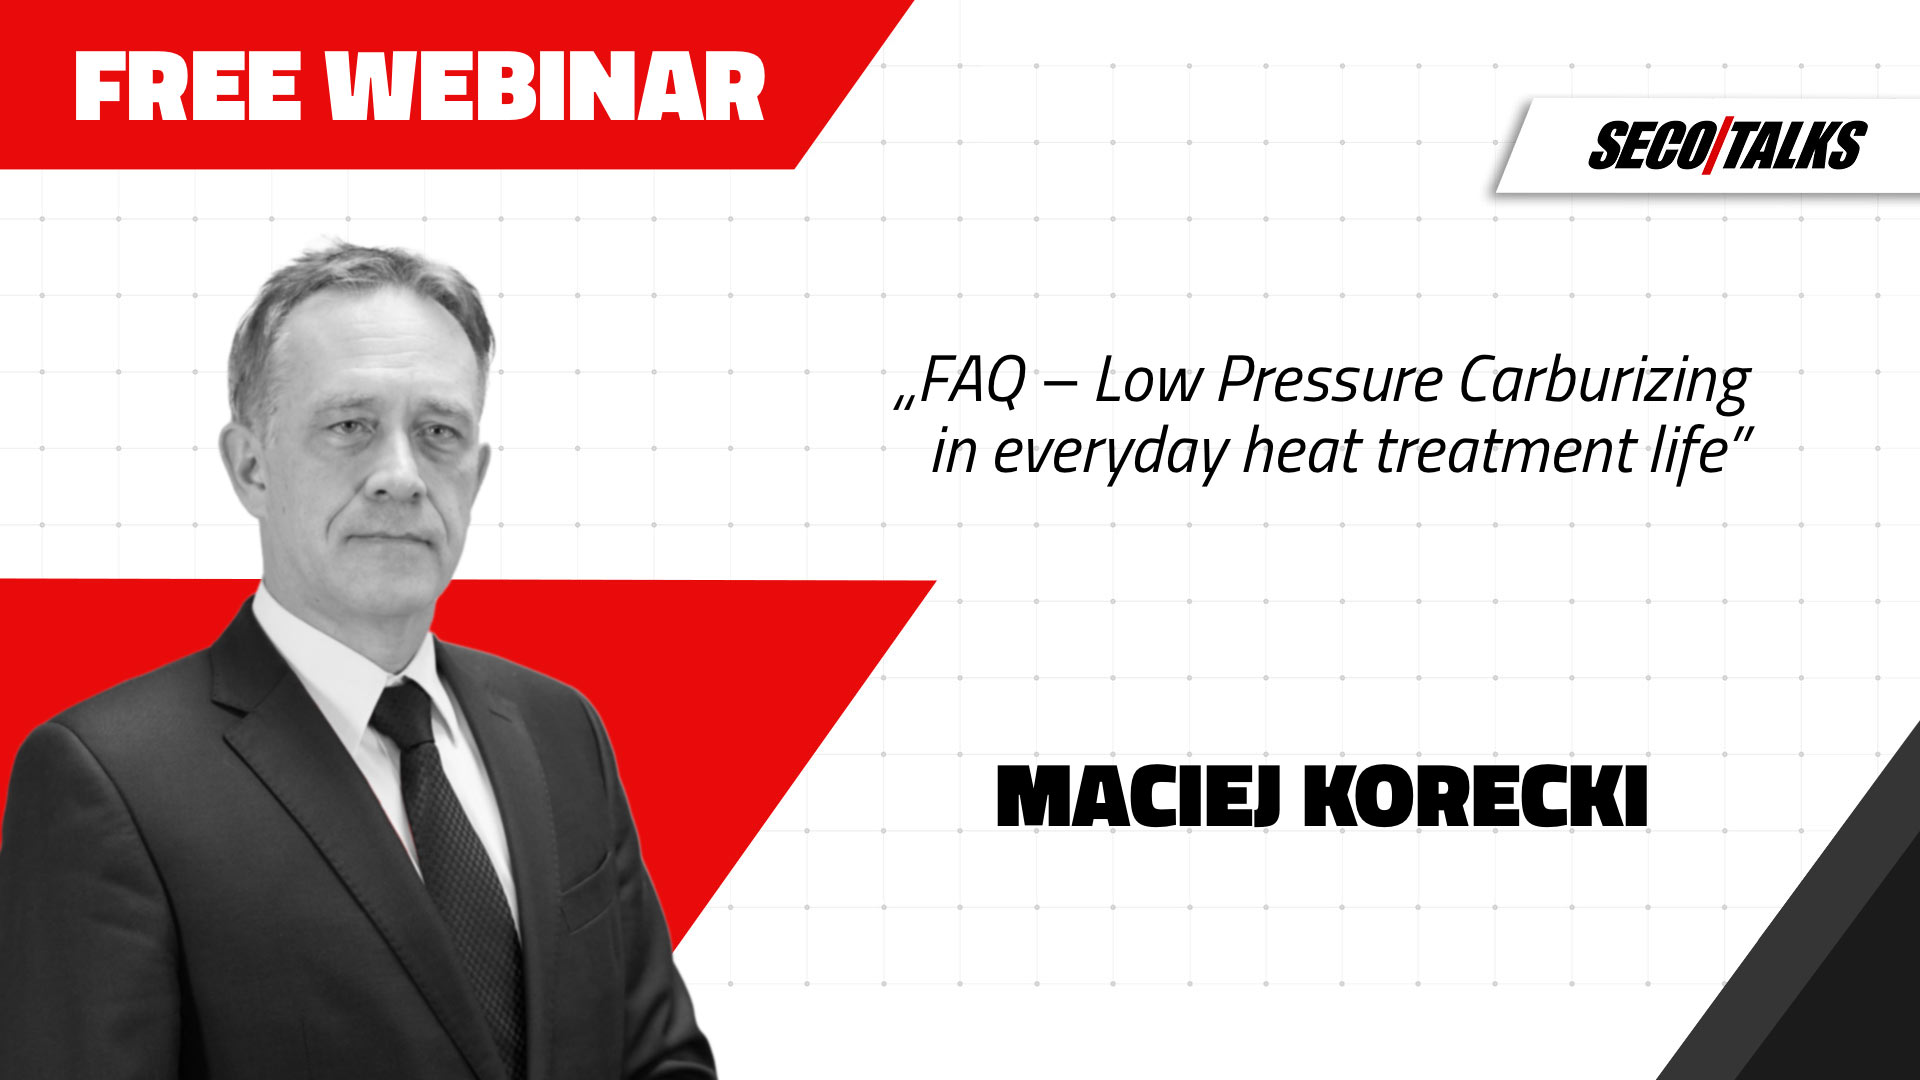 FAQ – Low Pressure Carburizing in everyday heat treatment life